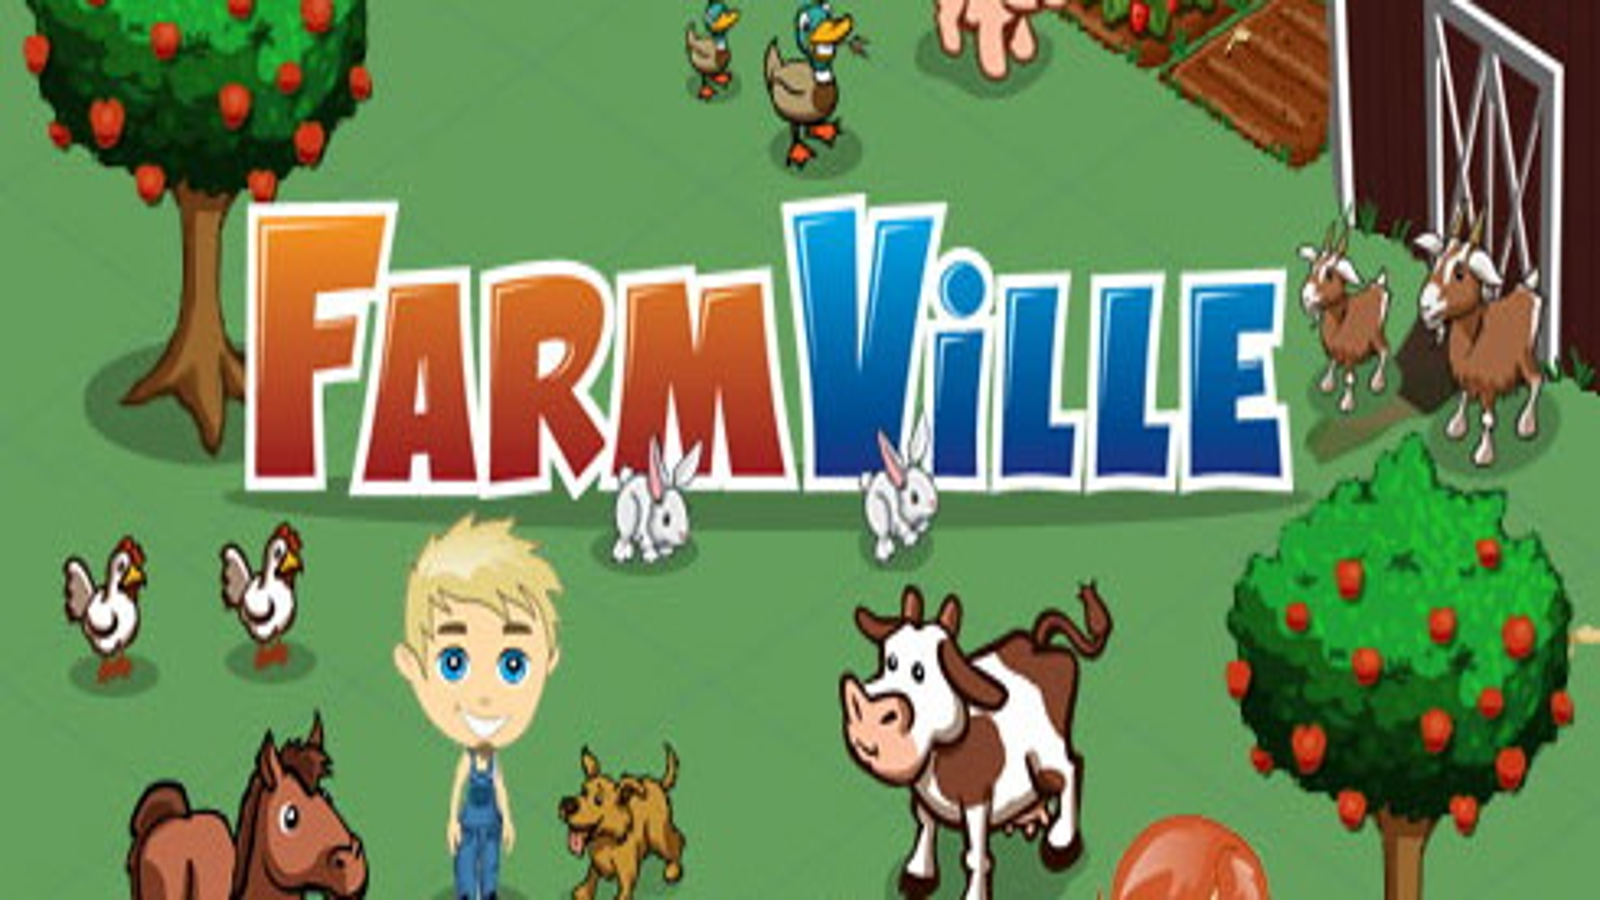 First look at FarmVille 2 on Facebook